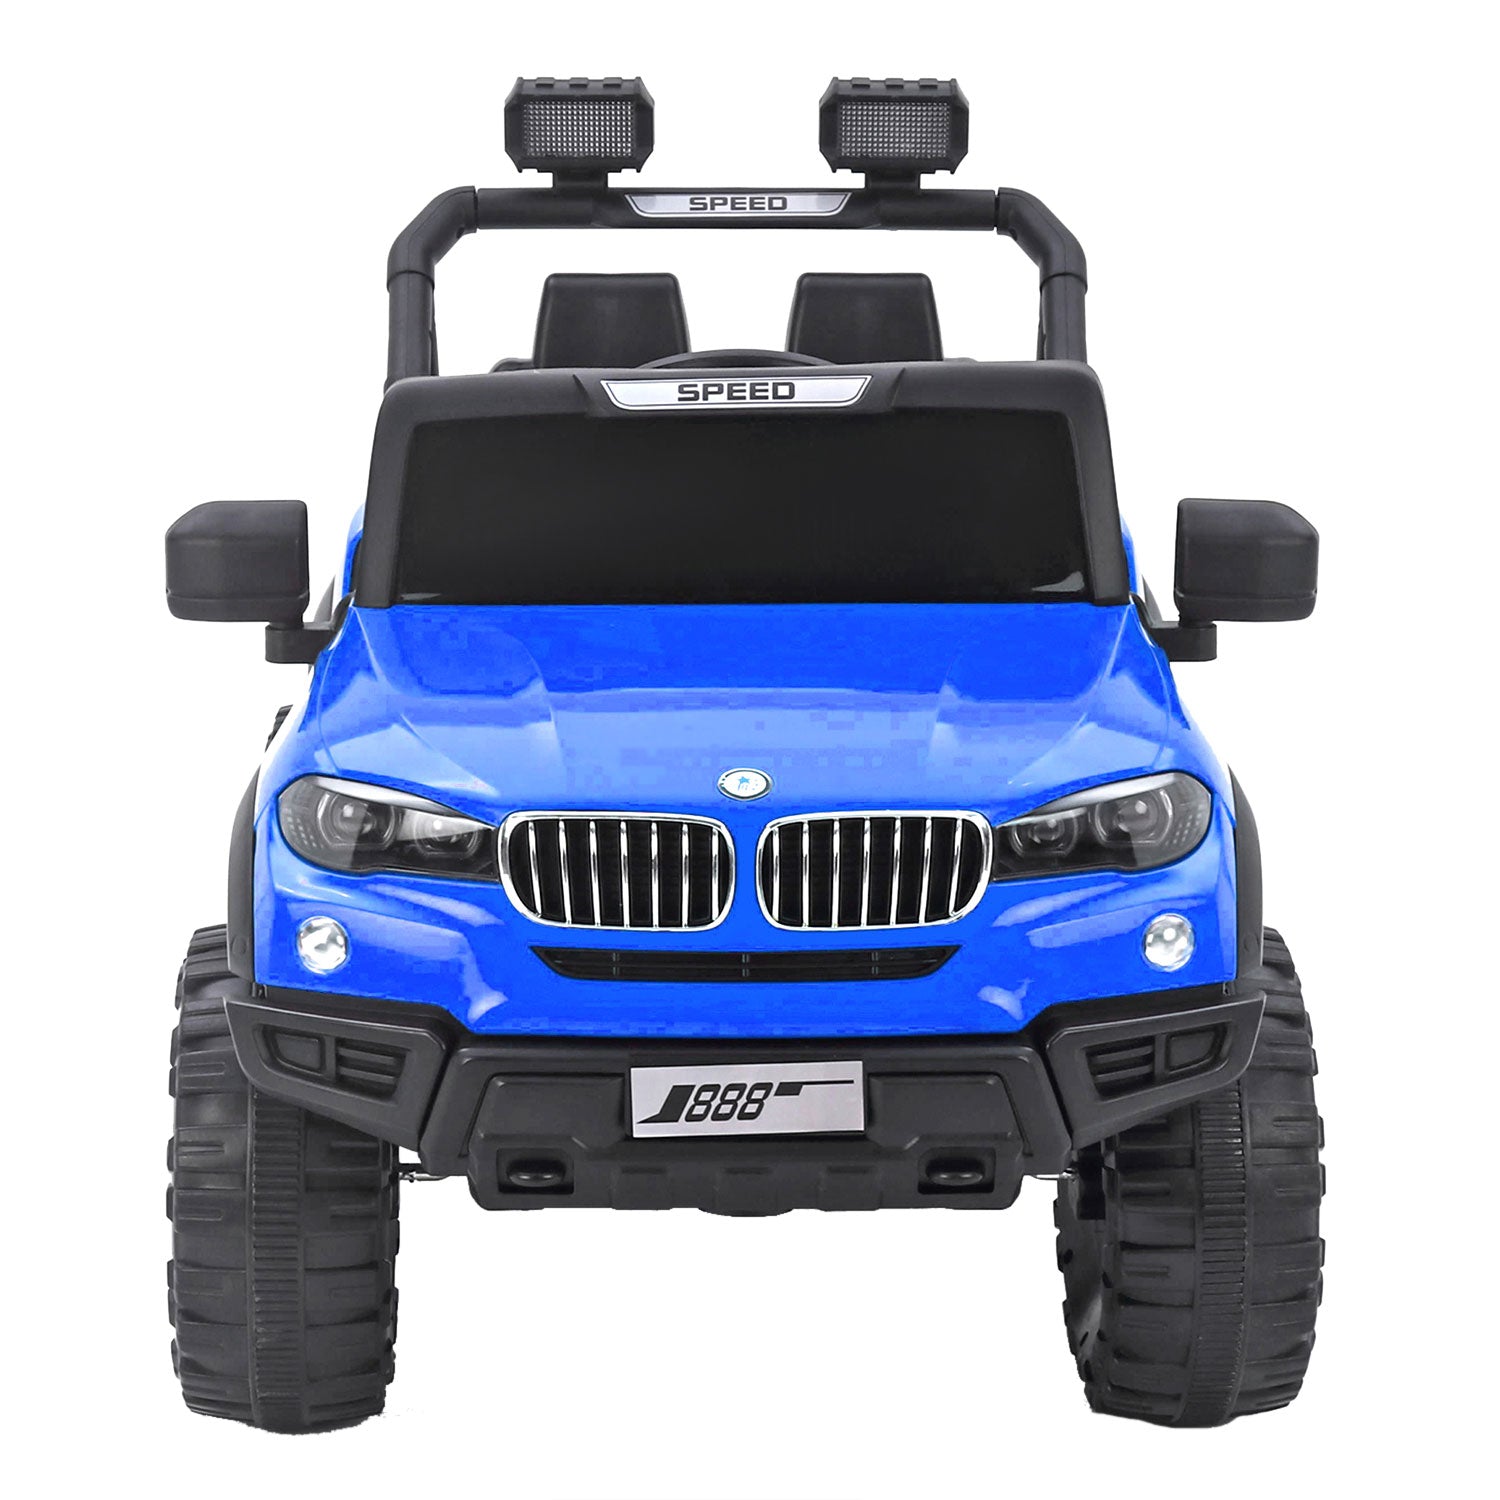 Baby Moo 4X4 Mercedes Benz Electric Ride-On Car for Kids | Rechargeable Battery | Bluetooth Remote Control | USB MP3 Player | Double Seat | Age 2-6 - Blue